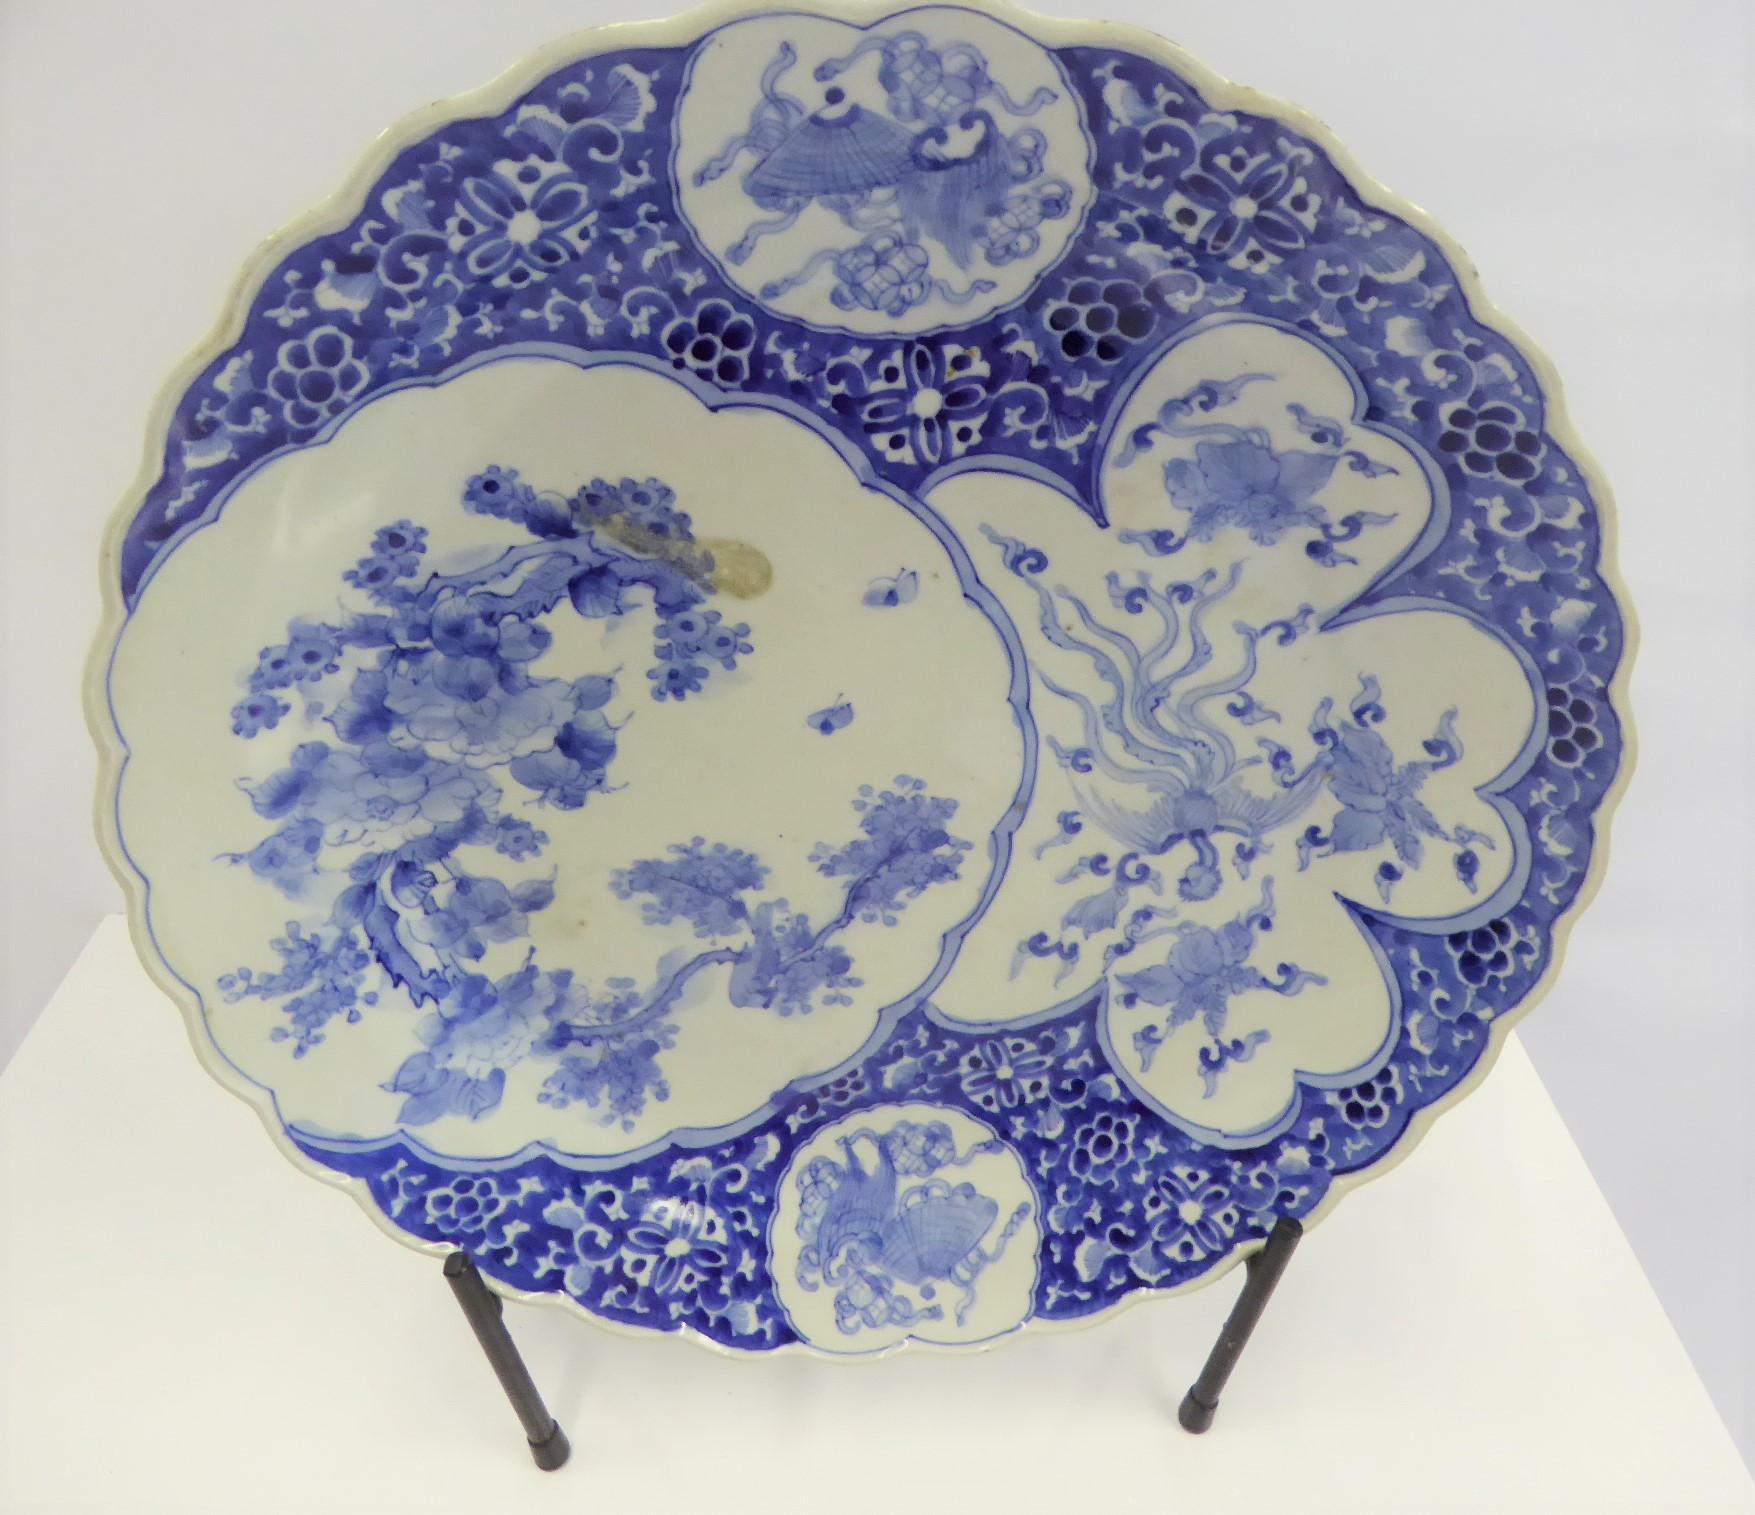 Japonisme Japanese Meiji Blue and White Scalloped Charger with Fans, Phoenix and Birds